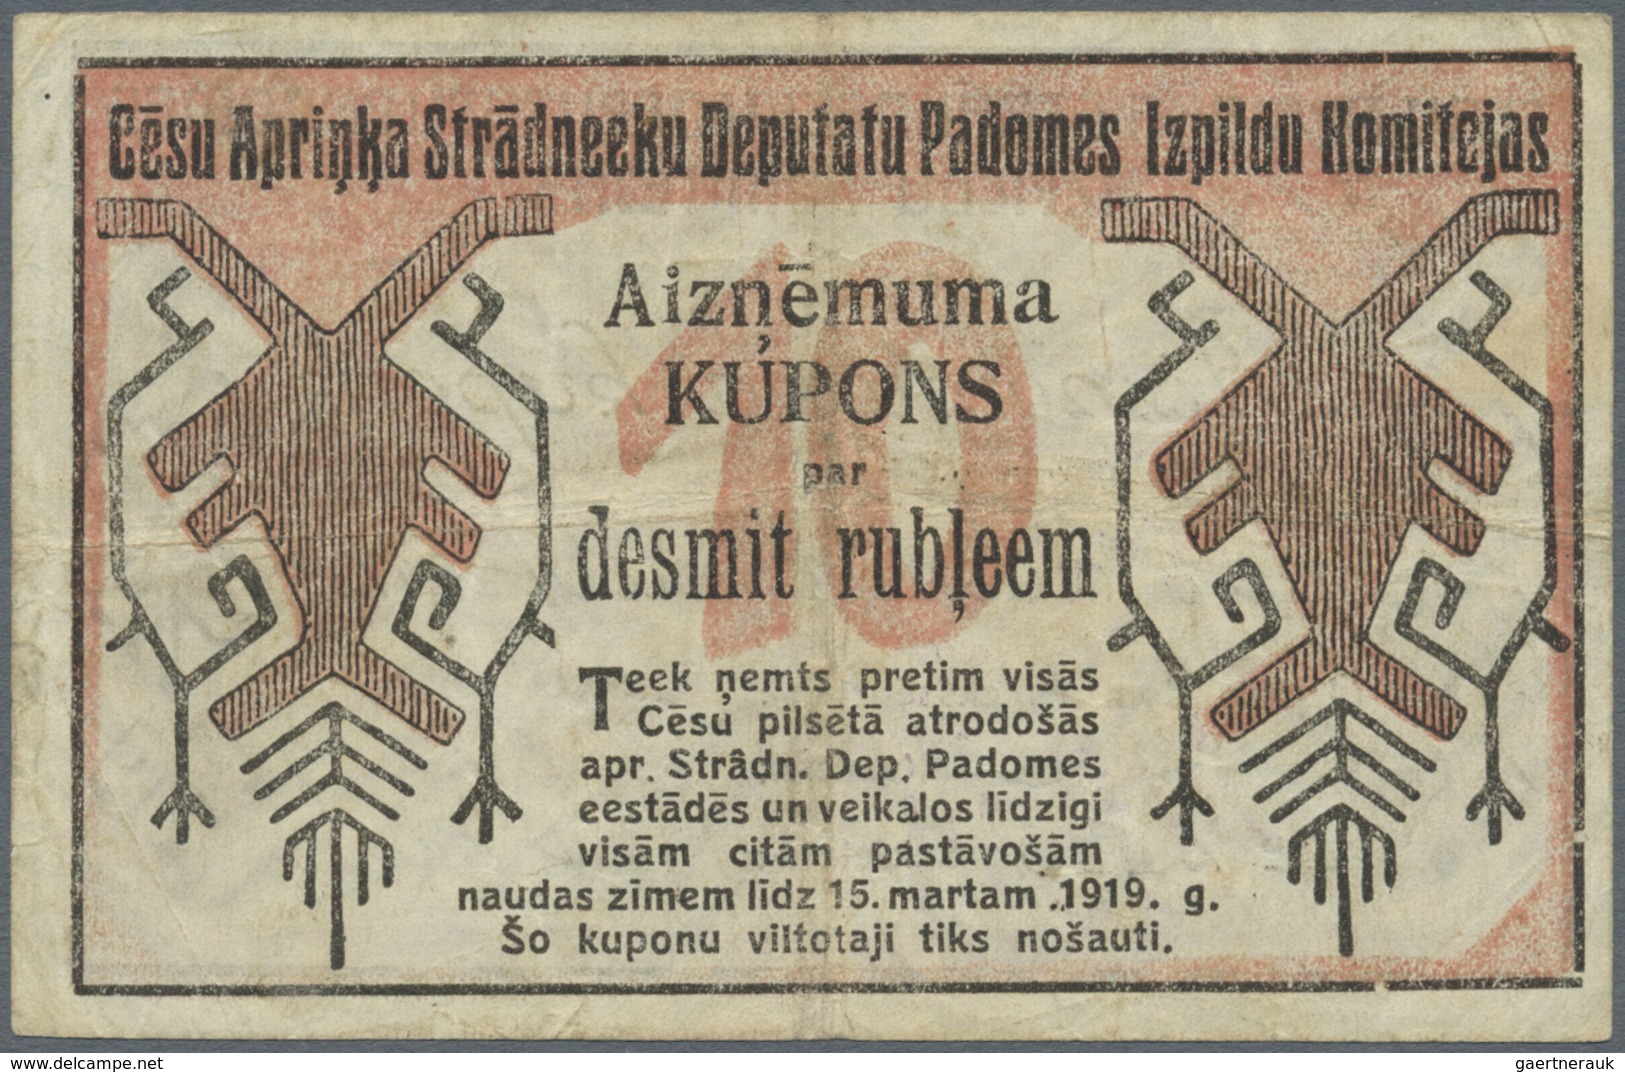 Latvia / Lettland: Cesis 10 Rubles 1919 R# 14790, Used With Center And Horizontal Fold, Light Staini - Latvia